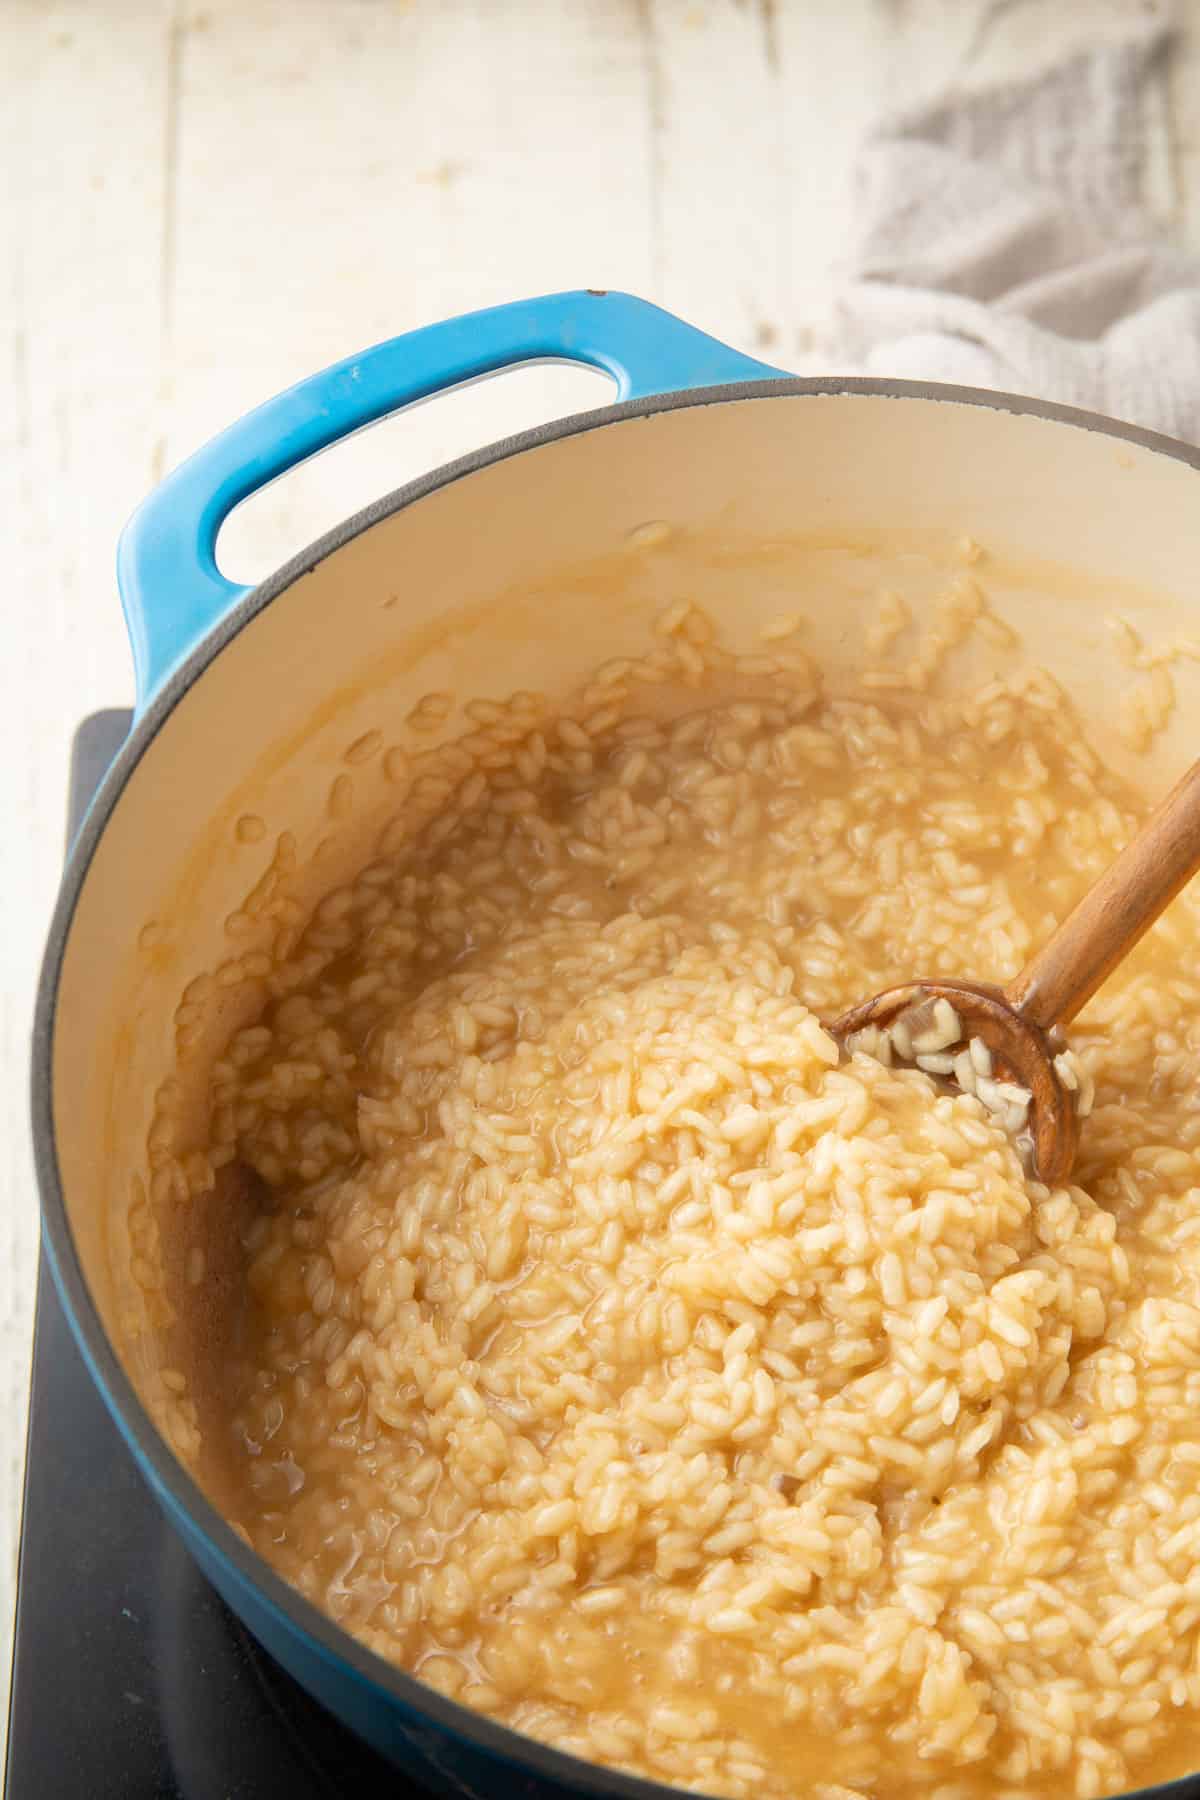 Risotto cooking in a pot with wooden spoon.